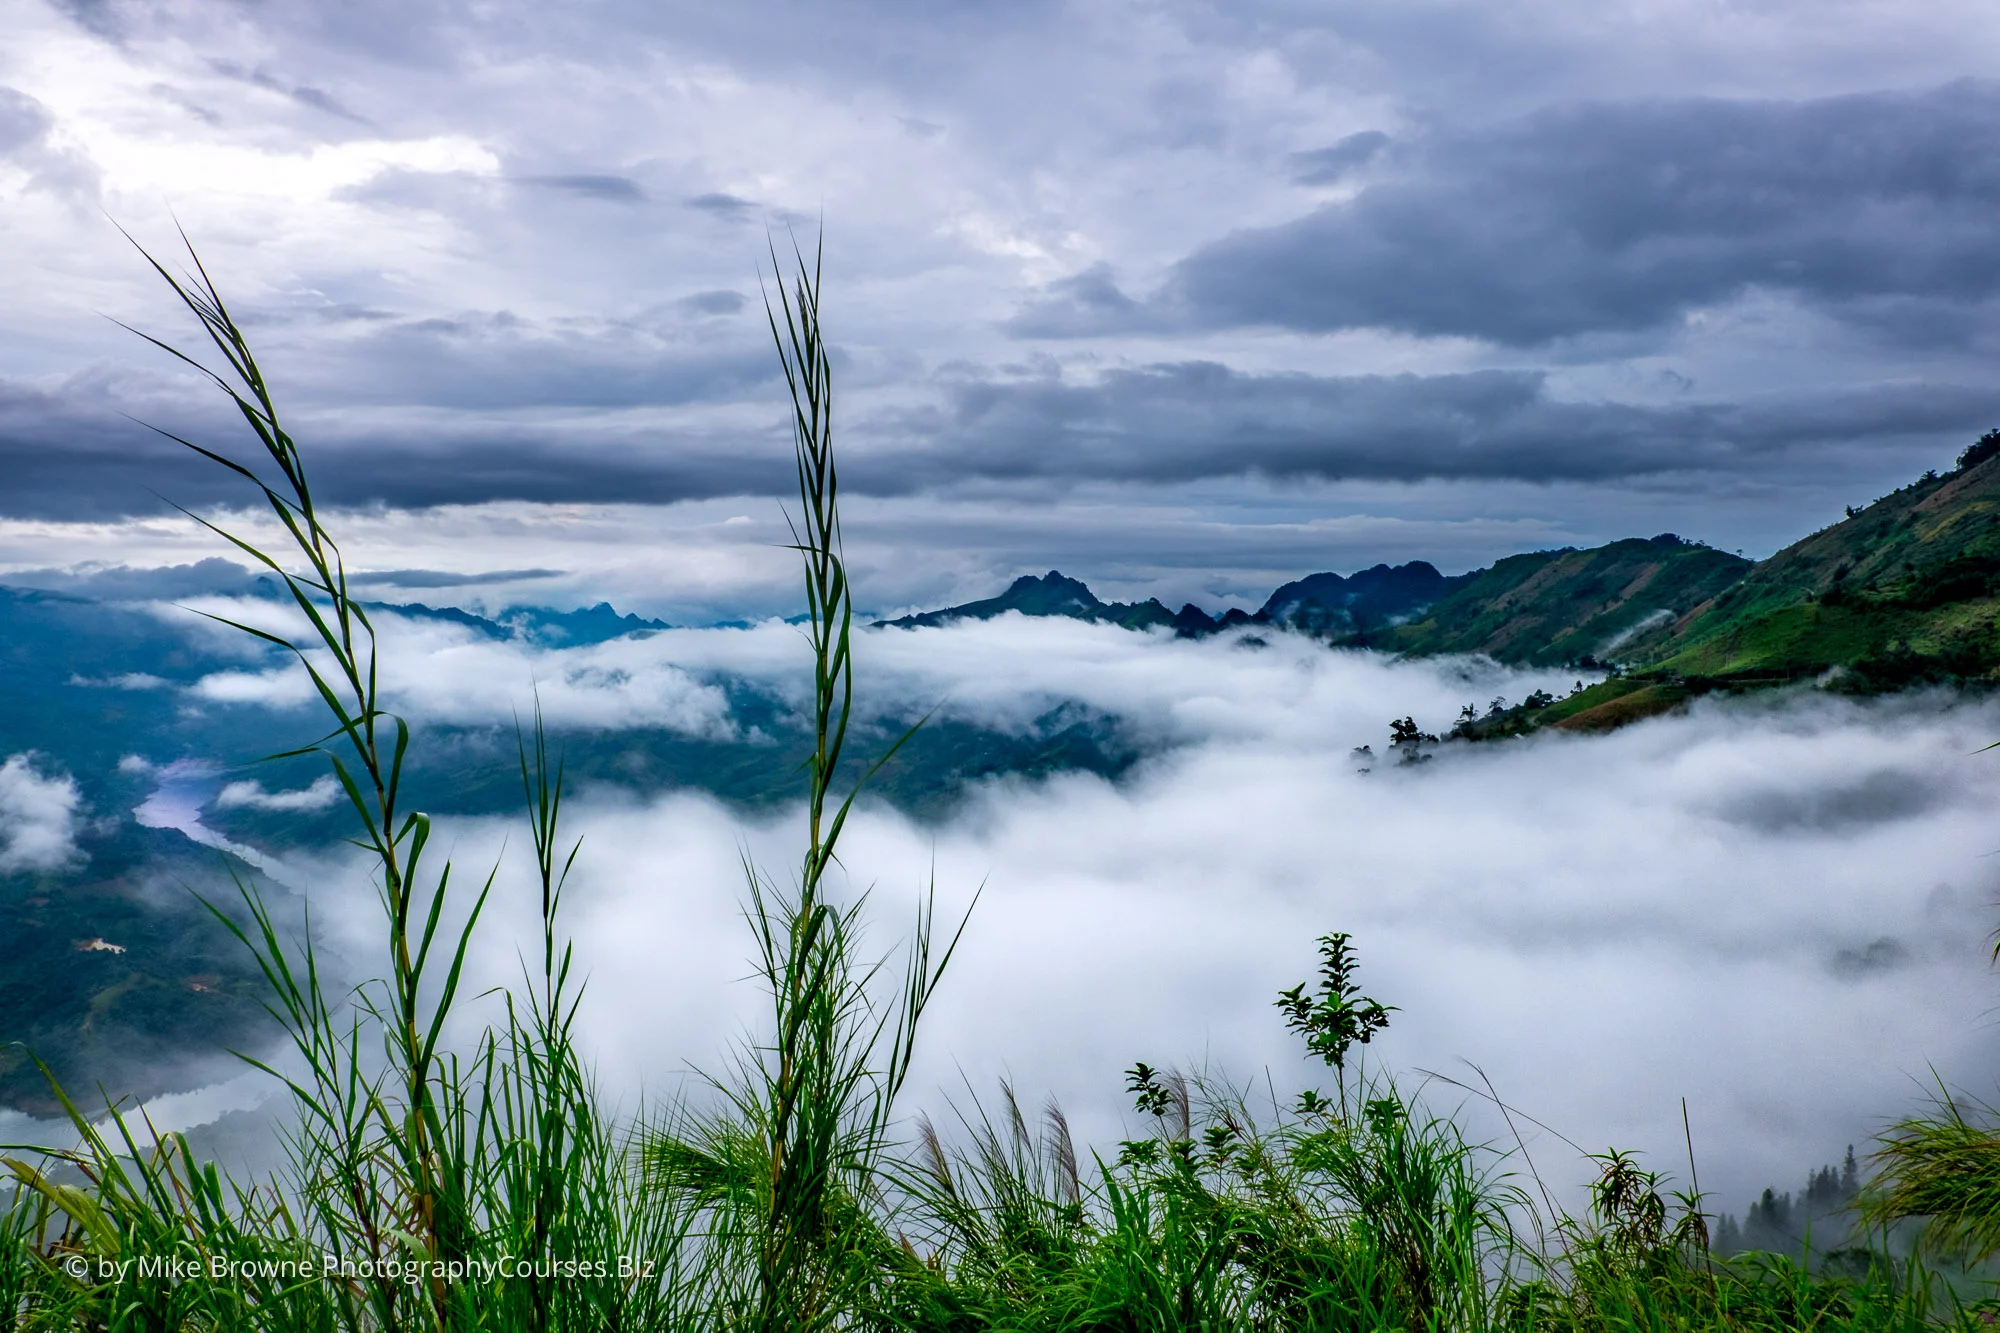 Tall grasses above clouds with mountains and cloudy sky beyond